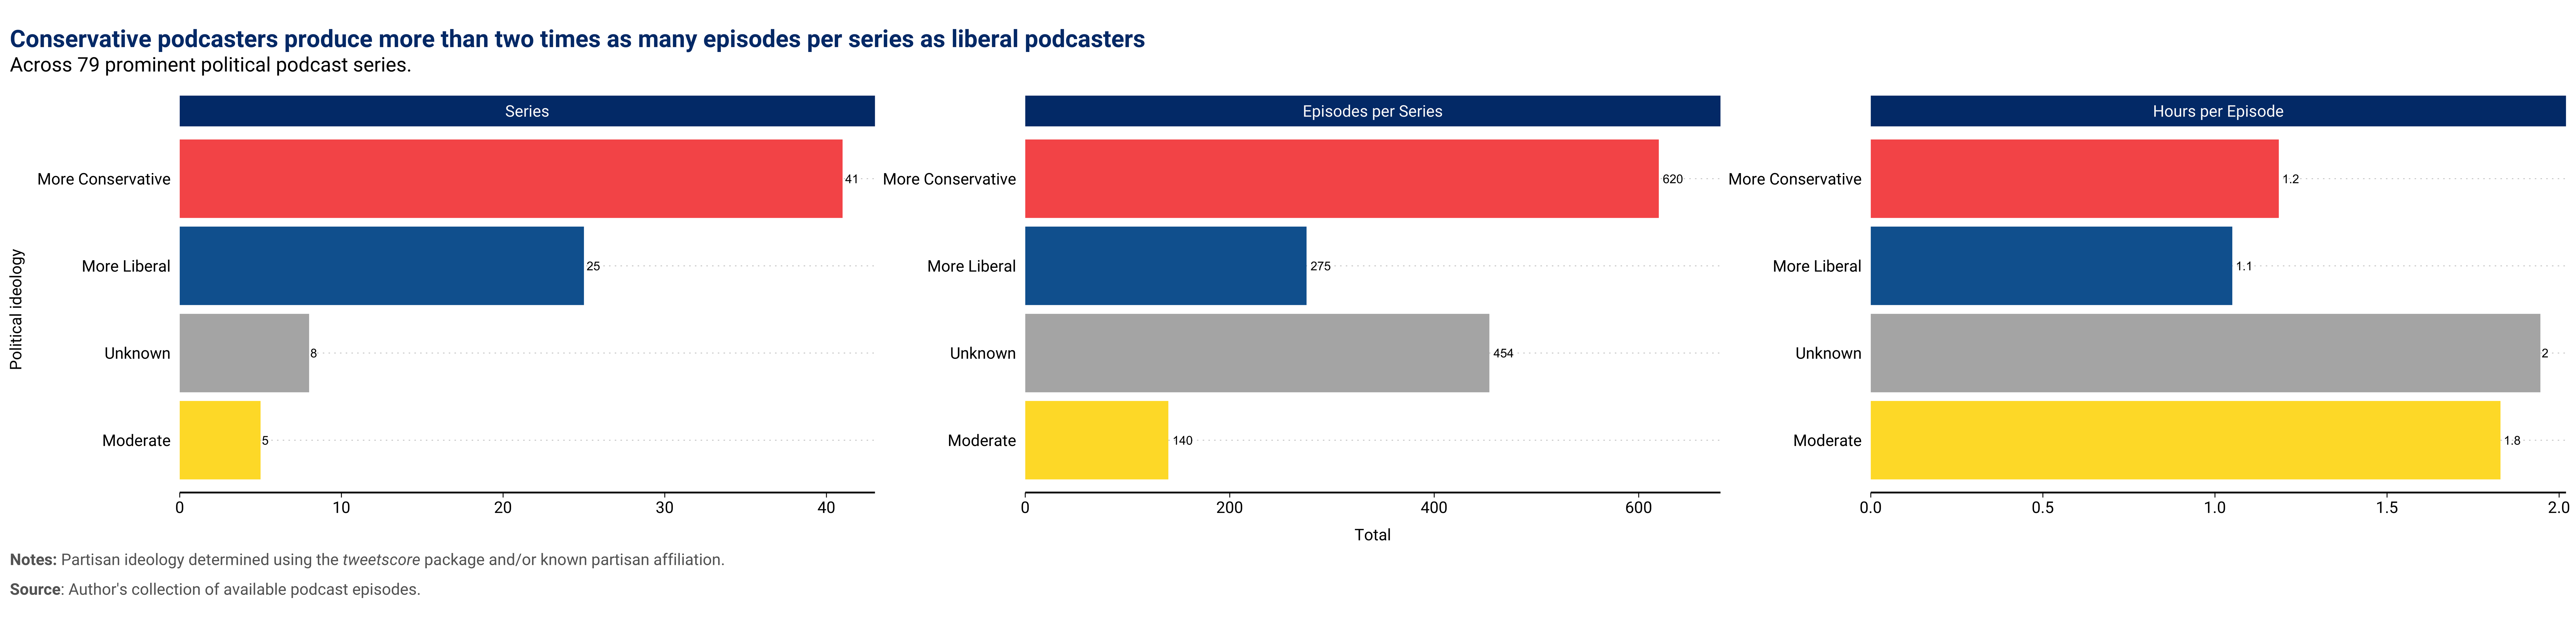 Figure: Conservative podcast episodes were far more common in the dataset, yet podcast series with a conservative host were less than two times more common than series with a liberal host. This is because the conservative podcasters produced more than 2.25 times as many episodes per series as the liberal podcasters did. On average, the conservative podcasters released 620 episodes per series while the liberal ones published only 275 episodes per series.